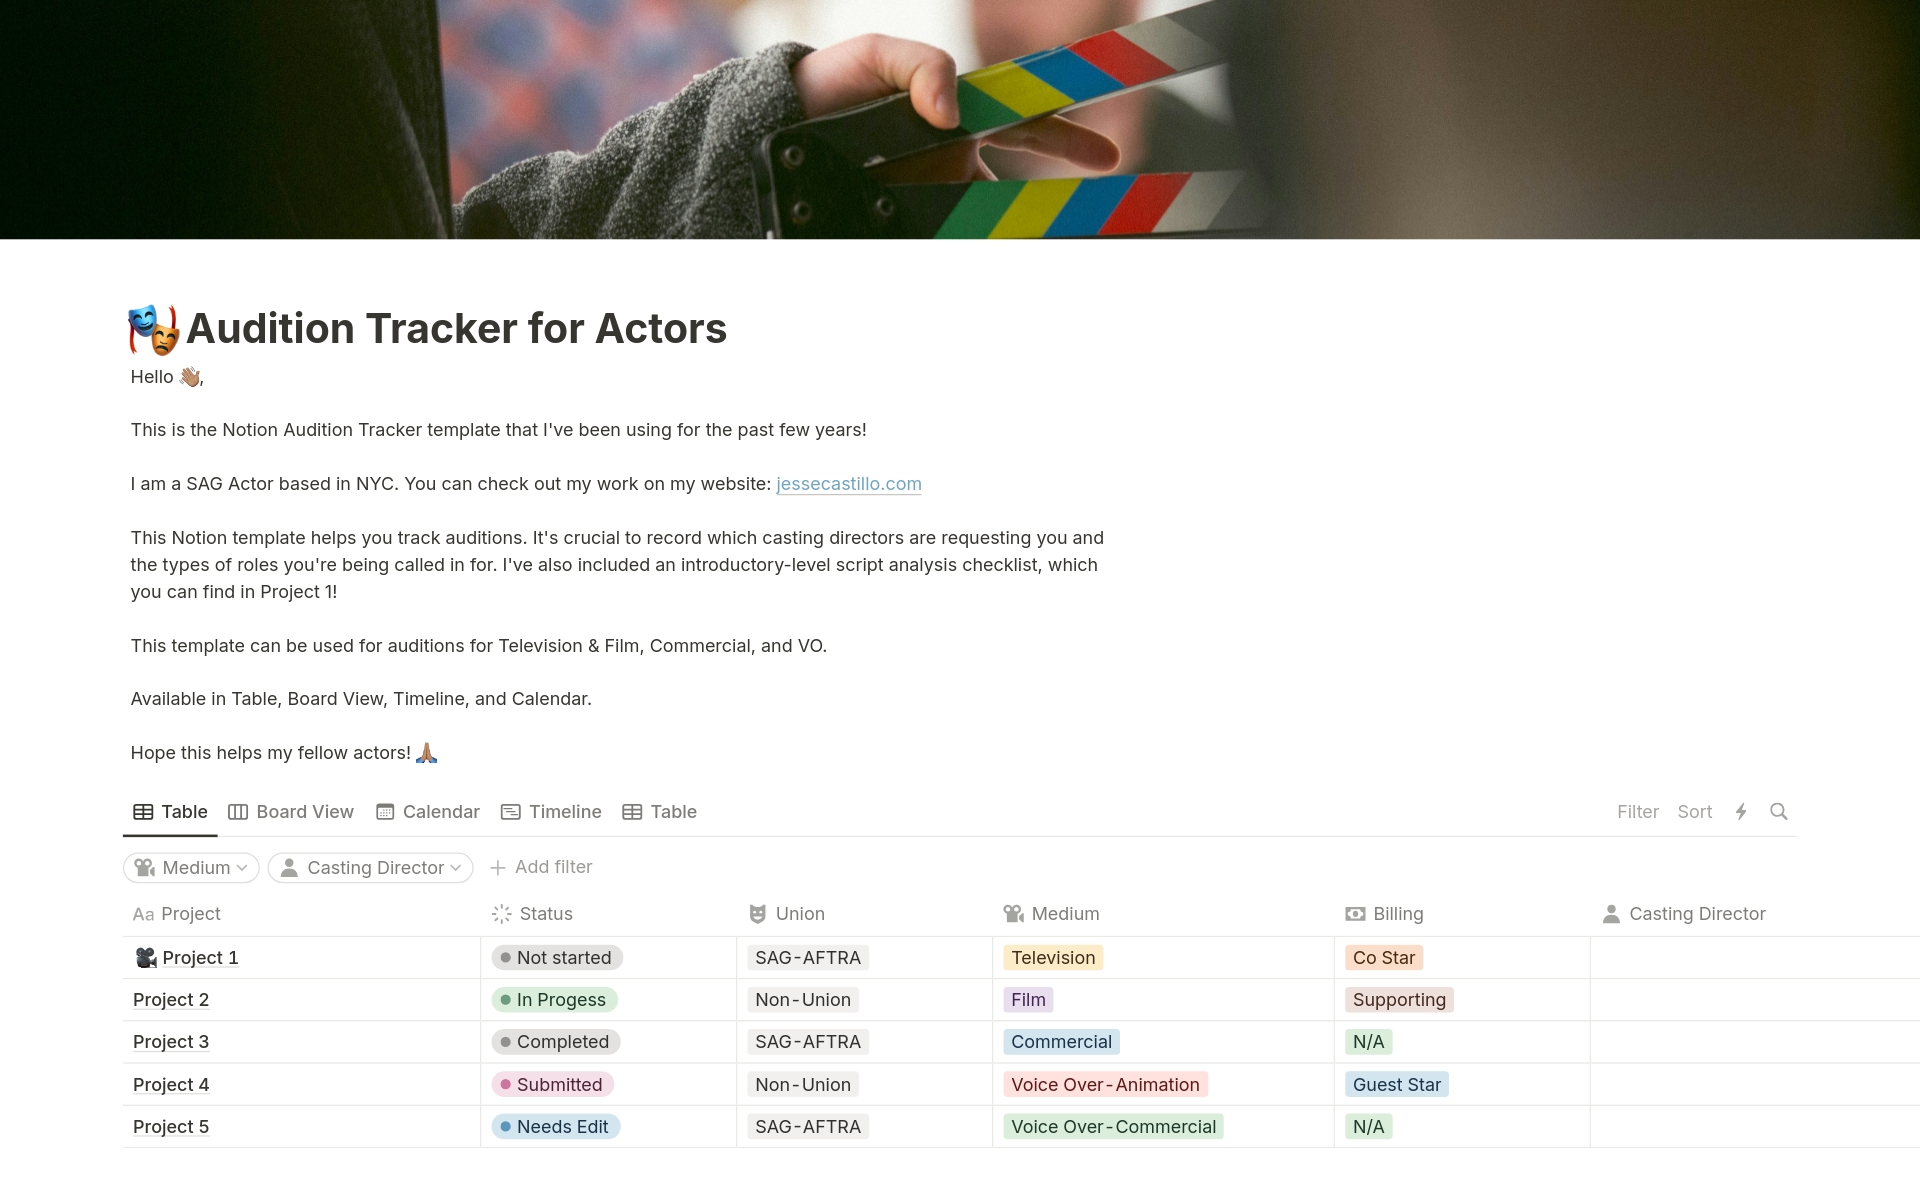 This Notion template helps you track auditions. It's crucial to record which casting directors are requesting you and the types of roles you're being called in for.